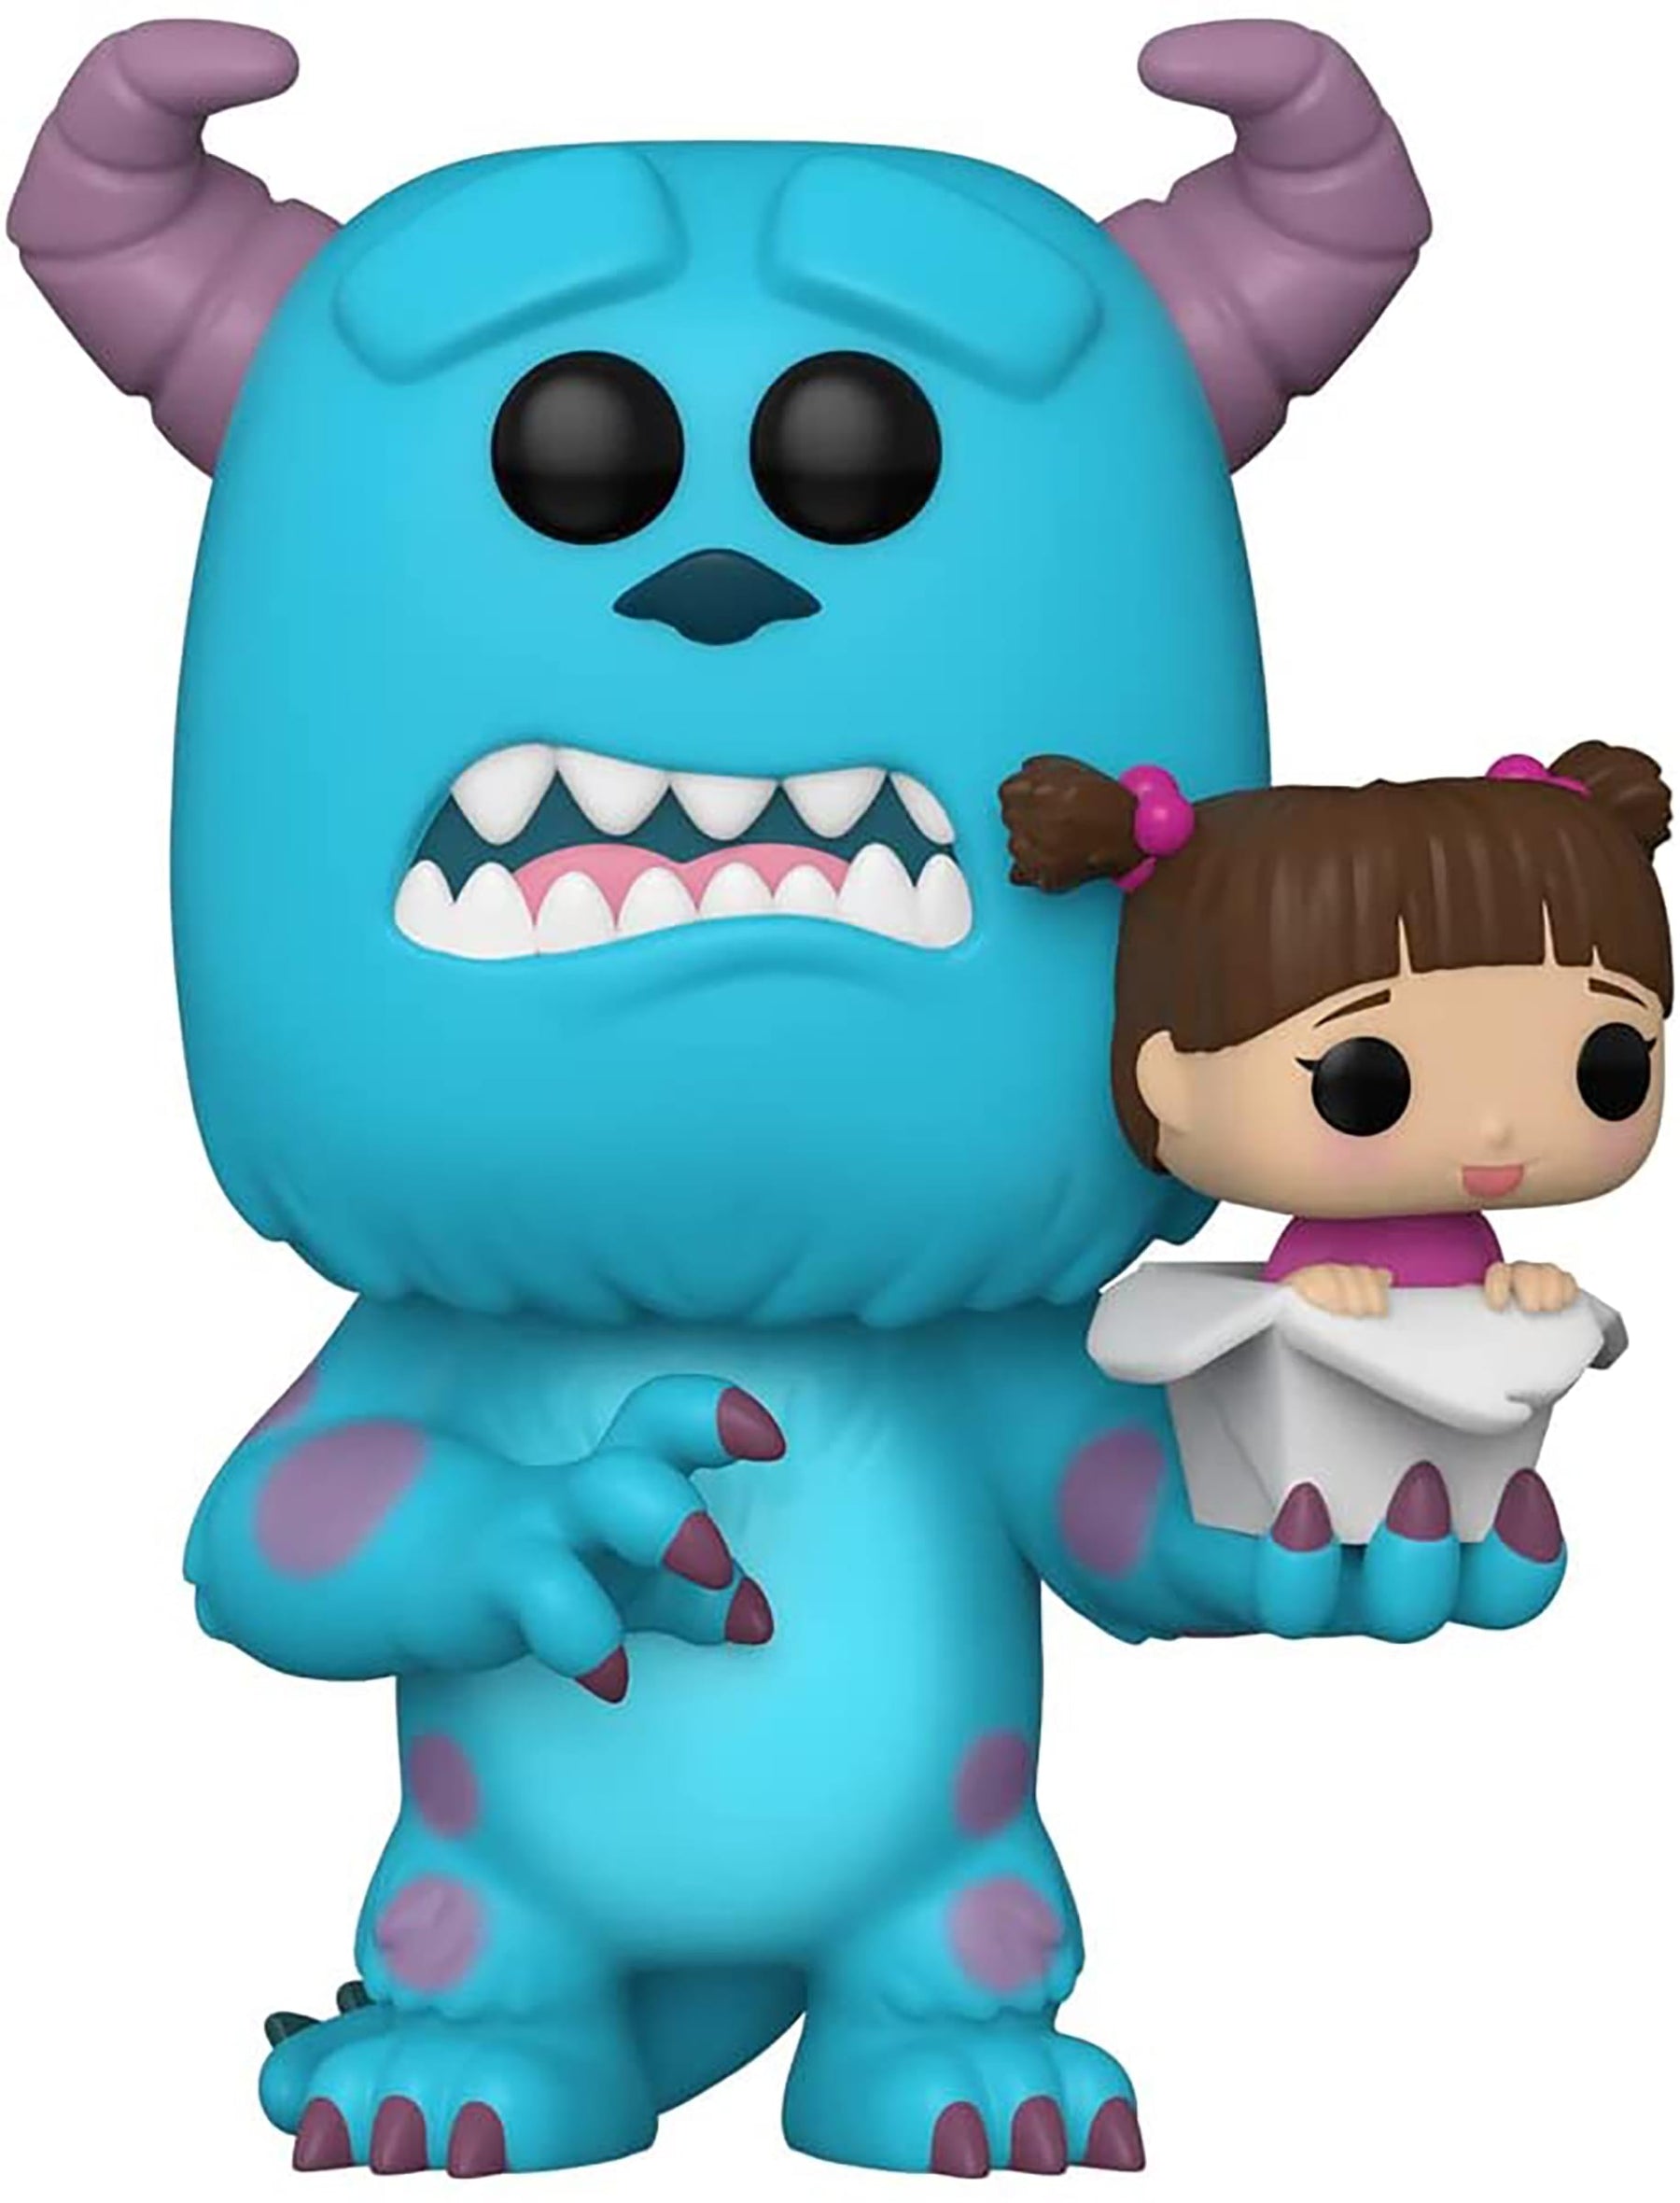 Monsters Inc. Funko POP Vinyl Figure | Sulley with Boo